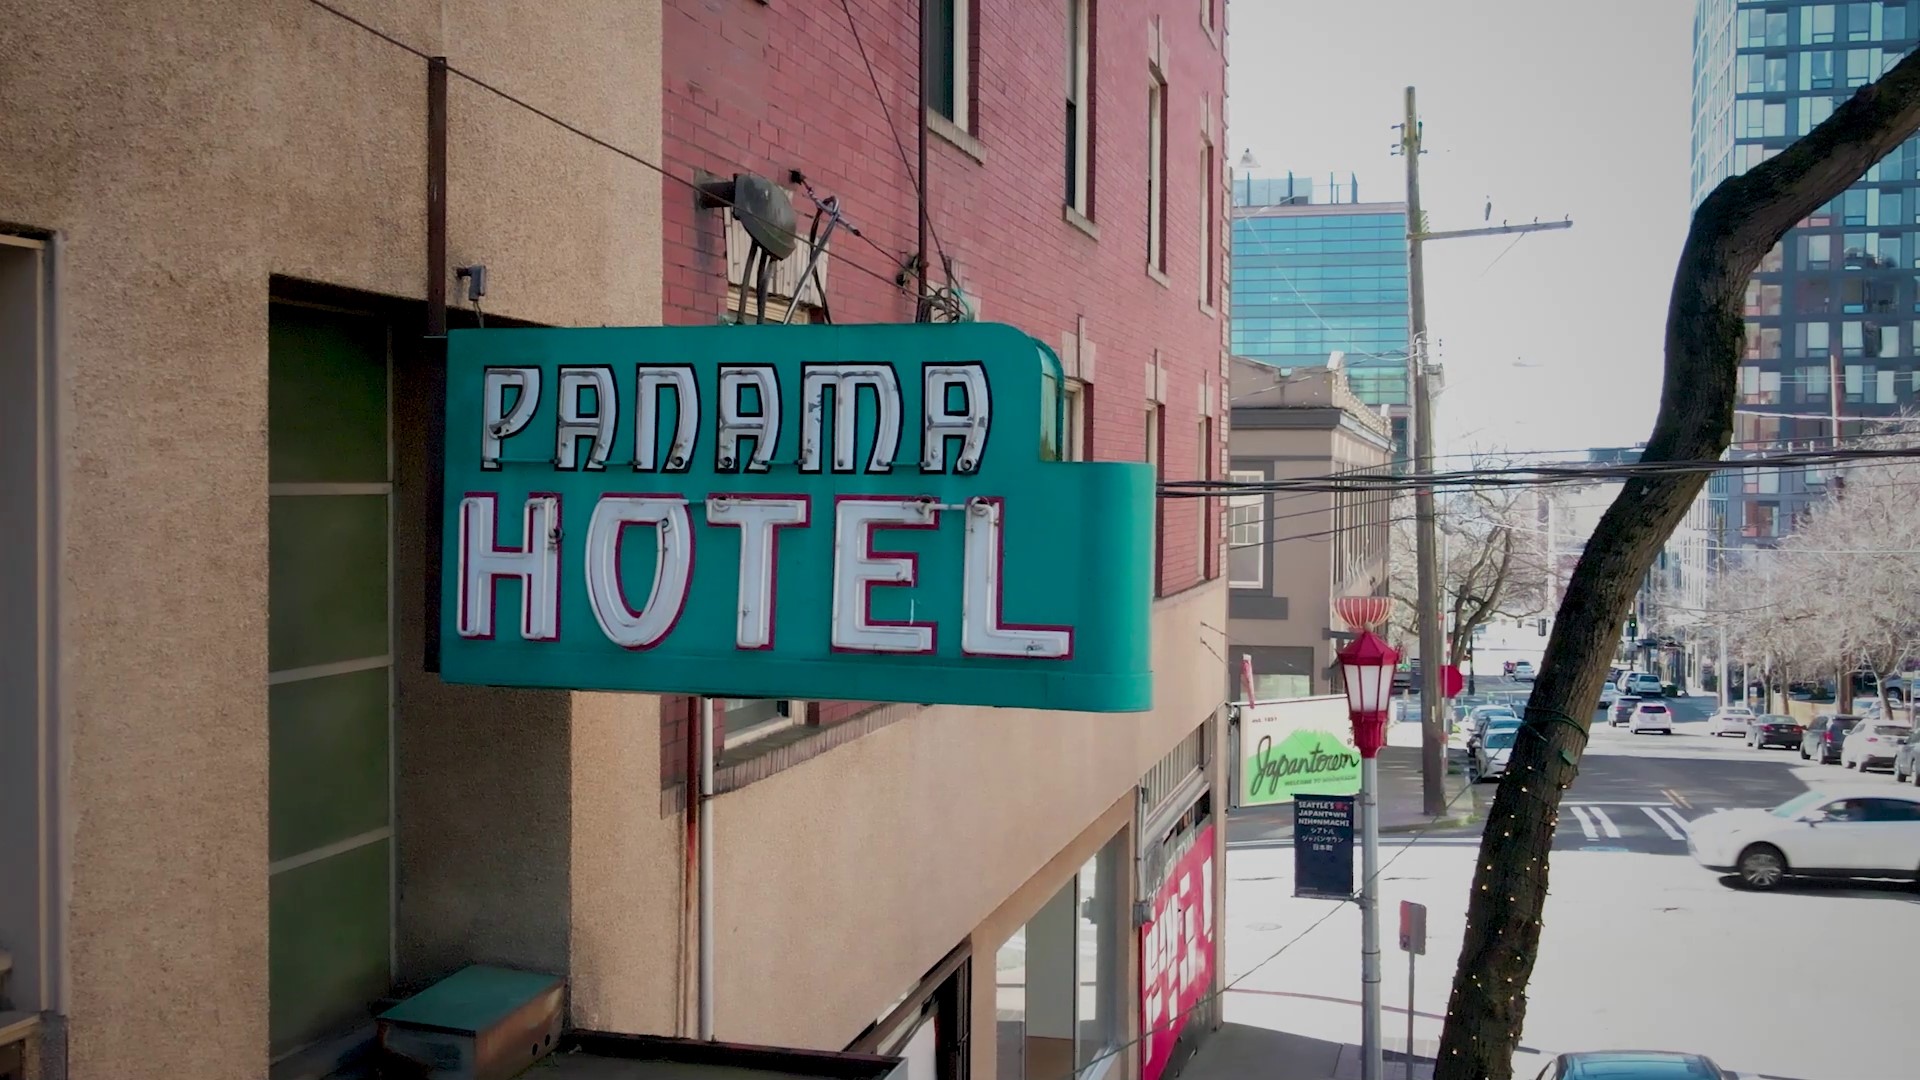 KING 5's Sharon Yoo shares how the Panama Hotel was important for preserving Japanese history during World War II.